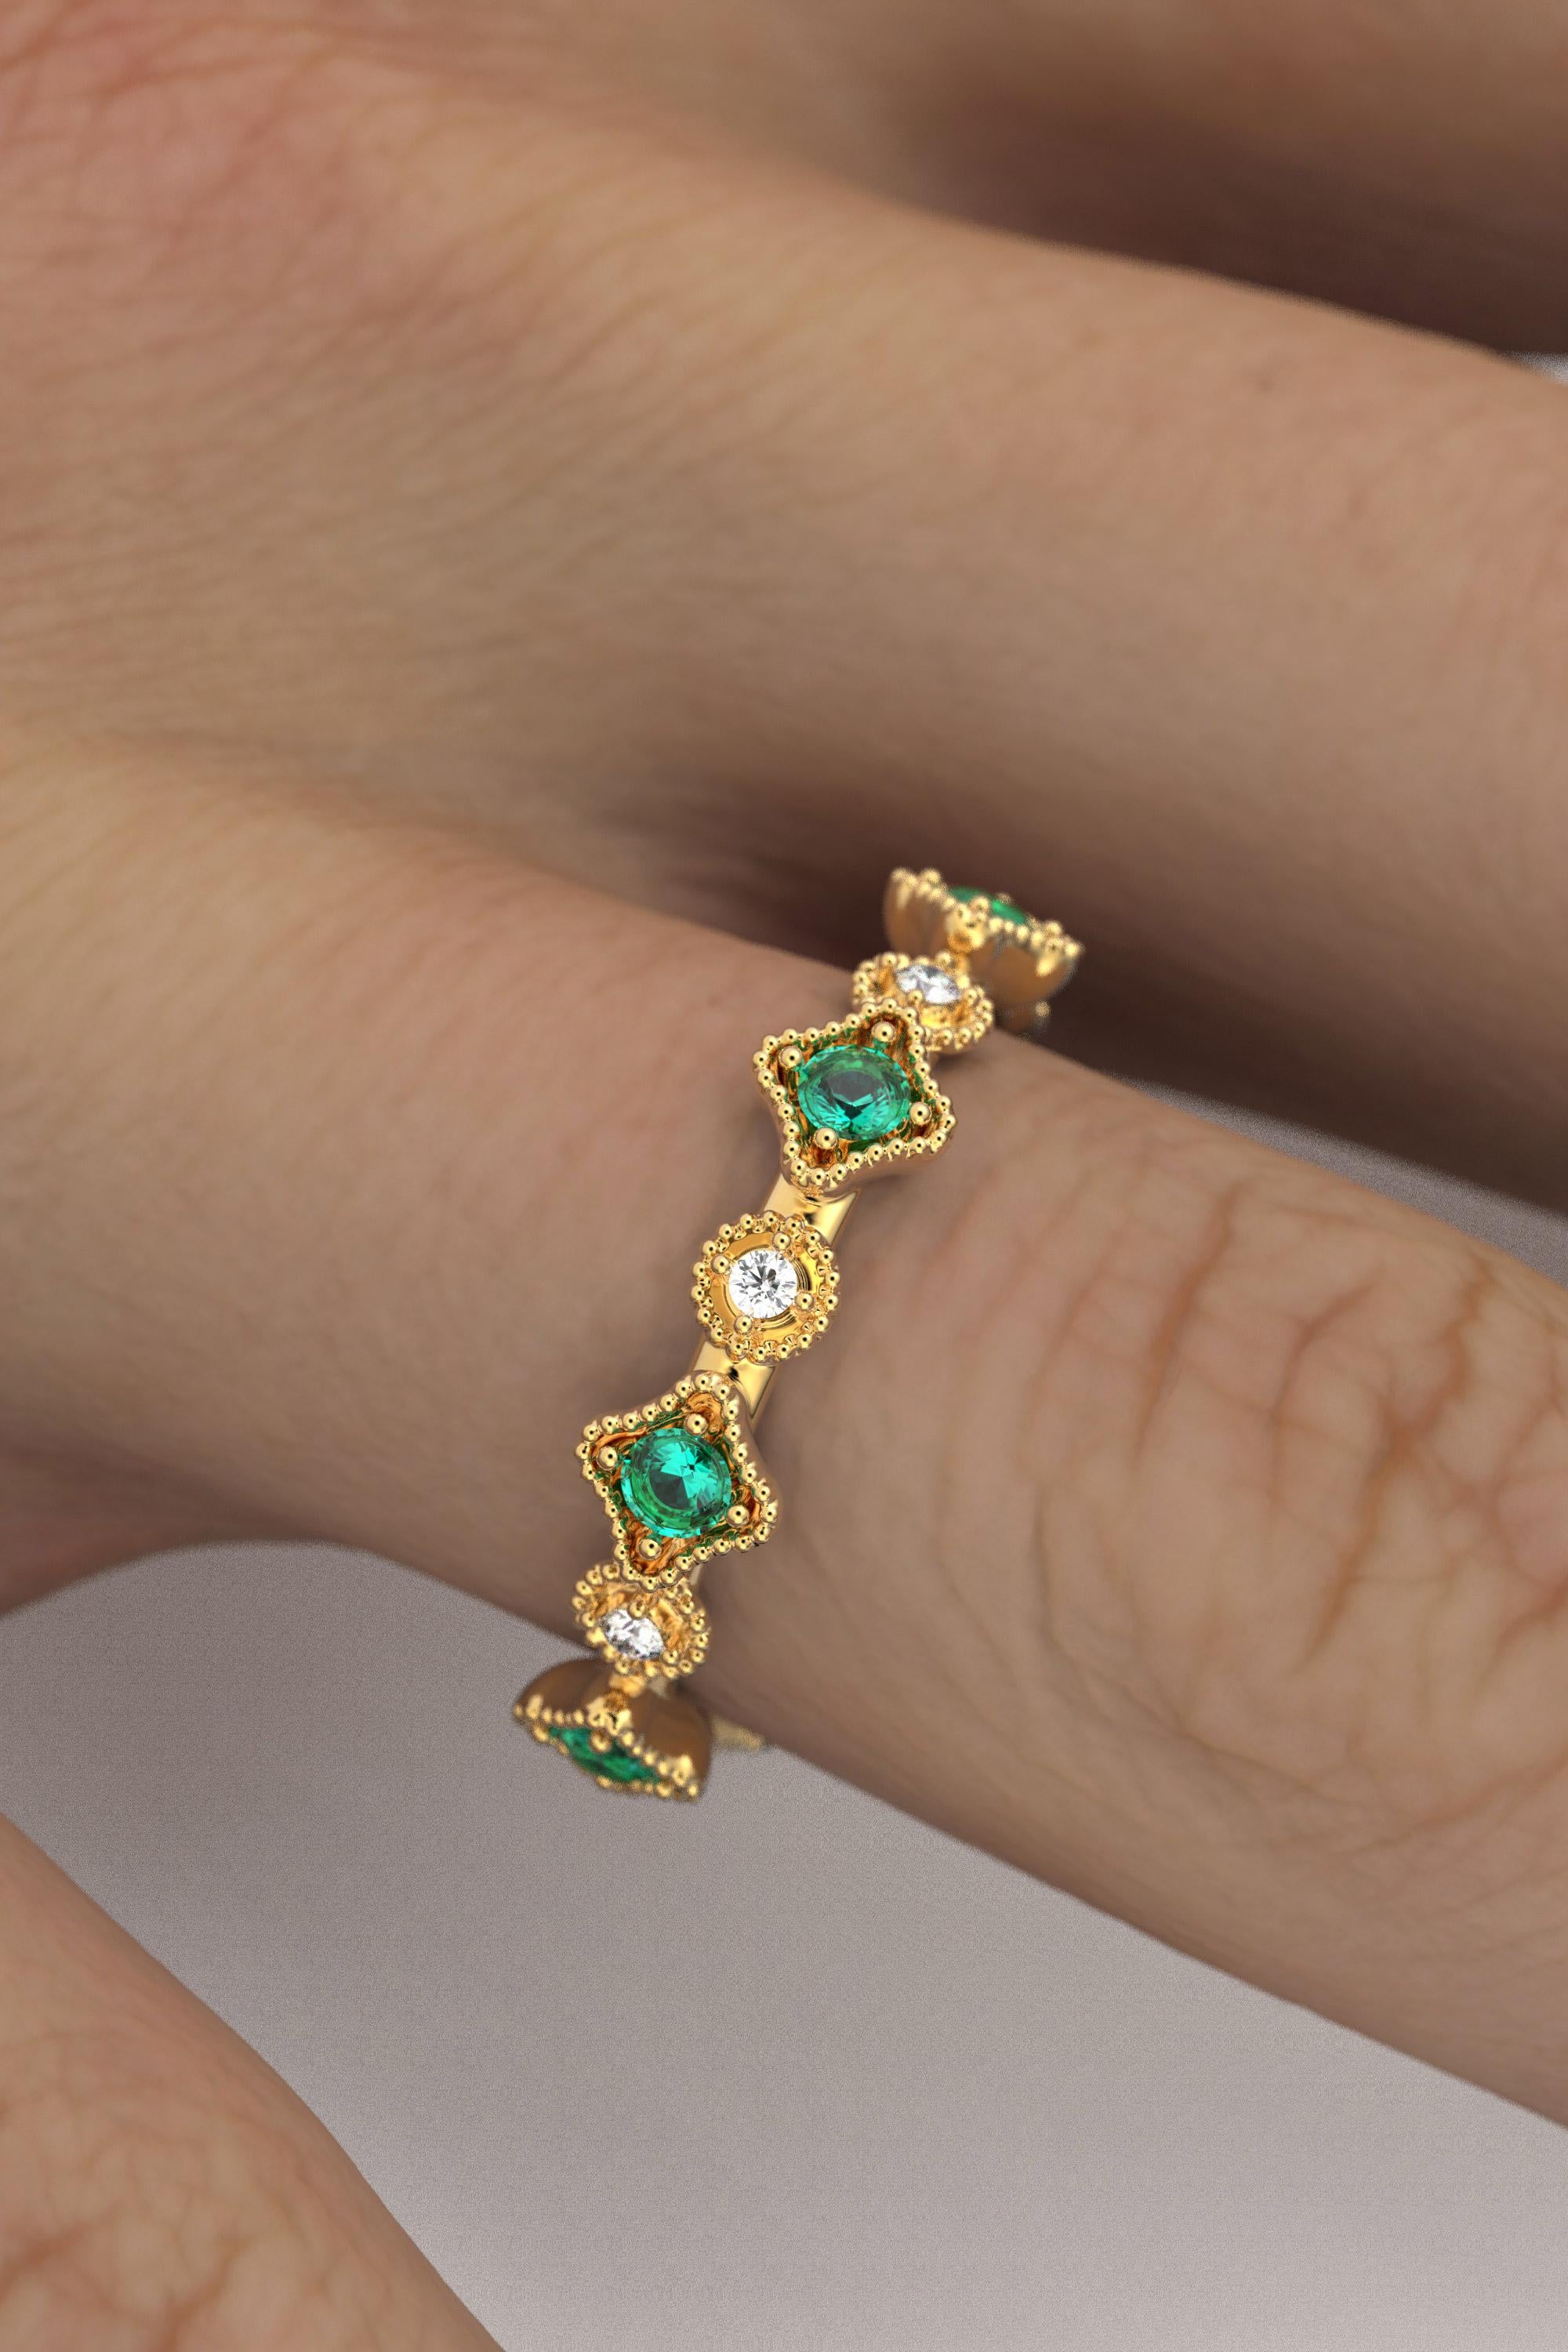 For Sale:  18k Gold Eternity Band with Natural Emerald and Diamonds, Made in Italy Jewelry 4